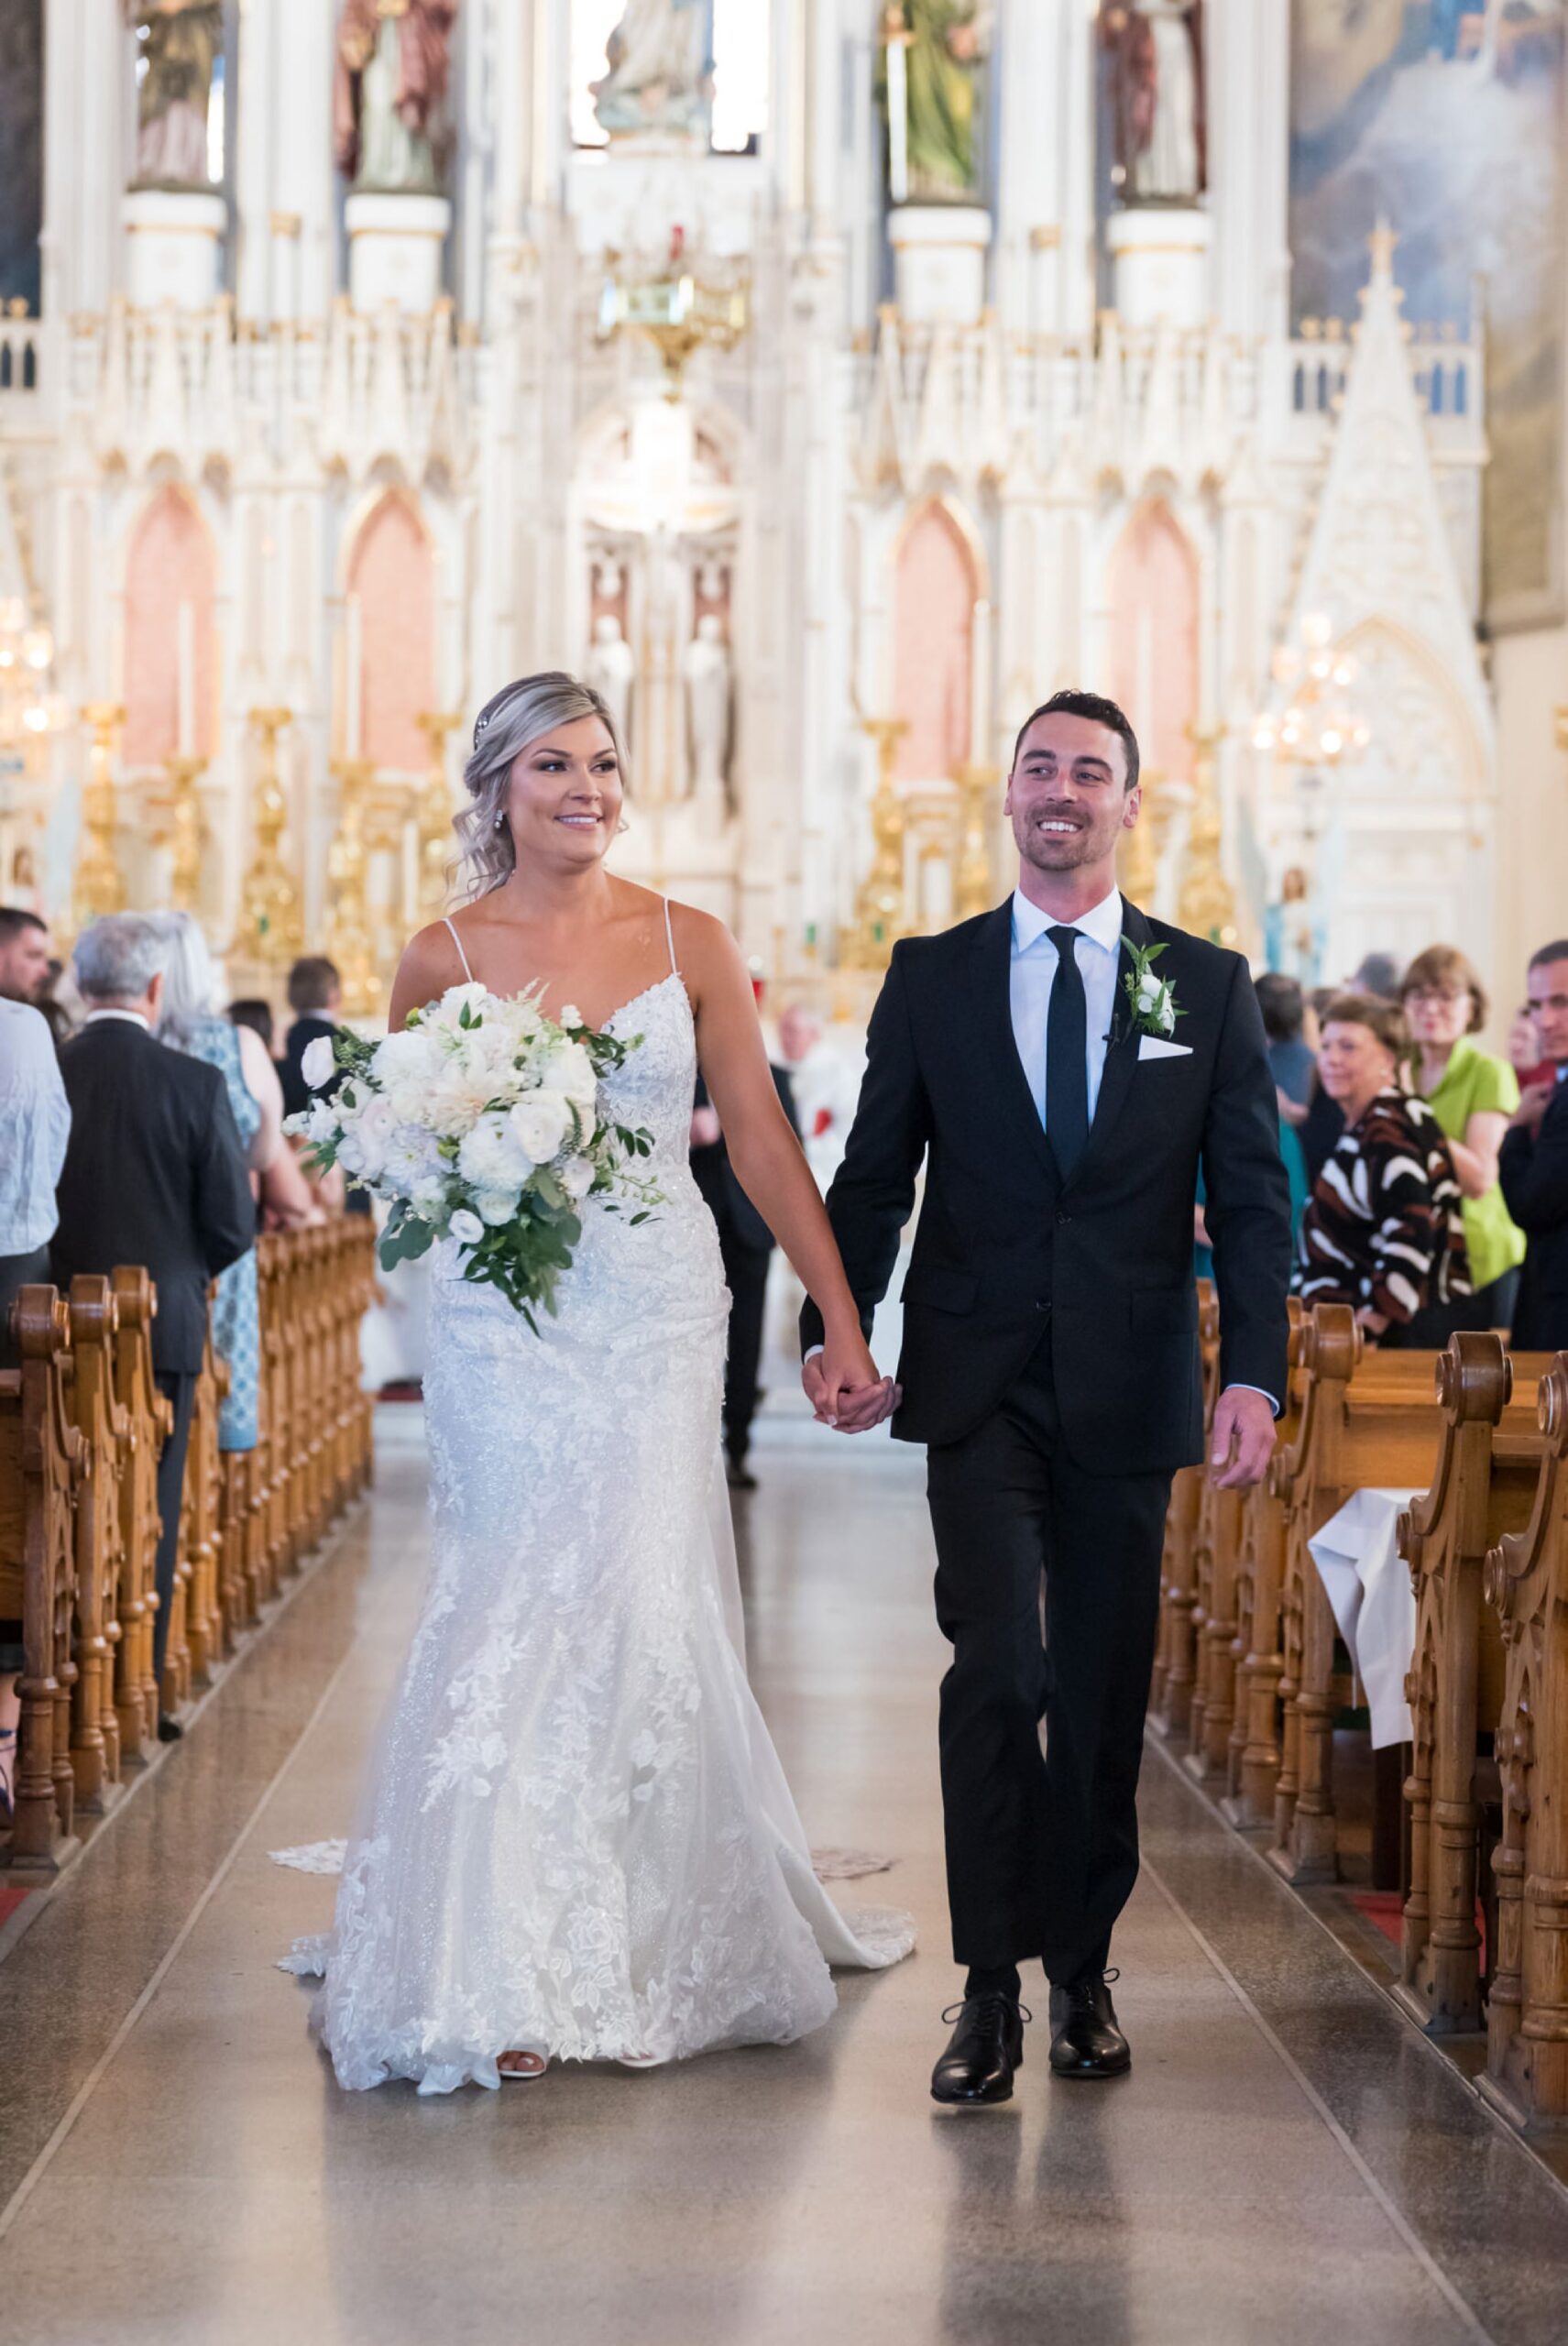 A bride and groom walk down the center aisle of Detroit's Sweetest Heart of Mary Catholic Church on their wedding day.  